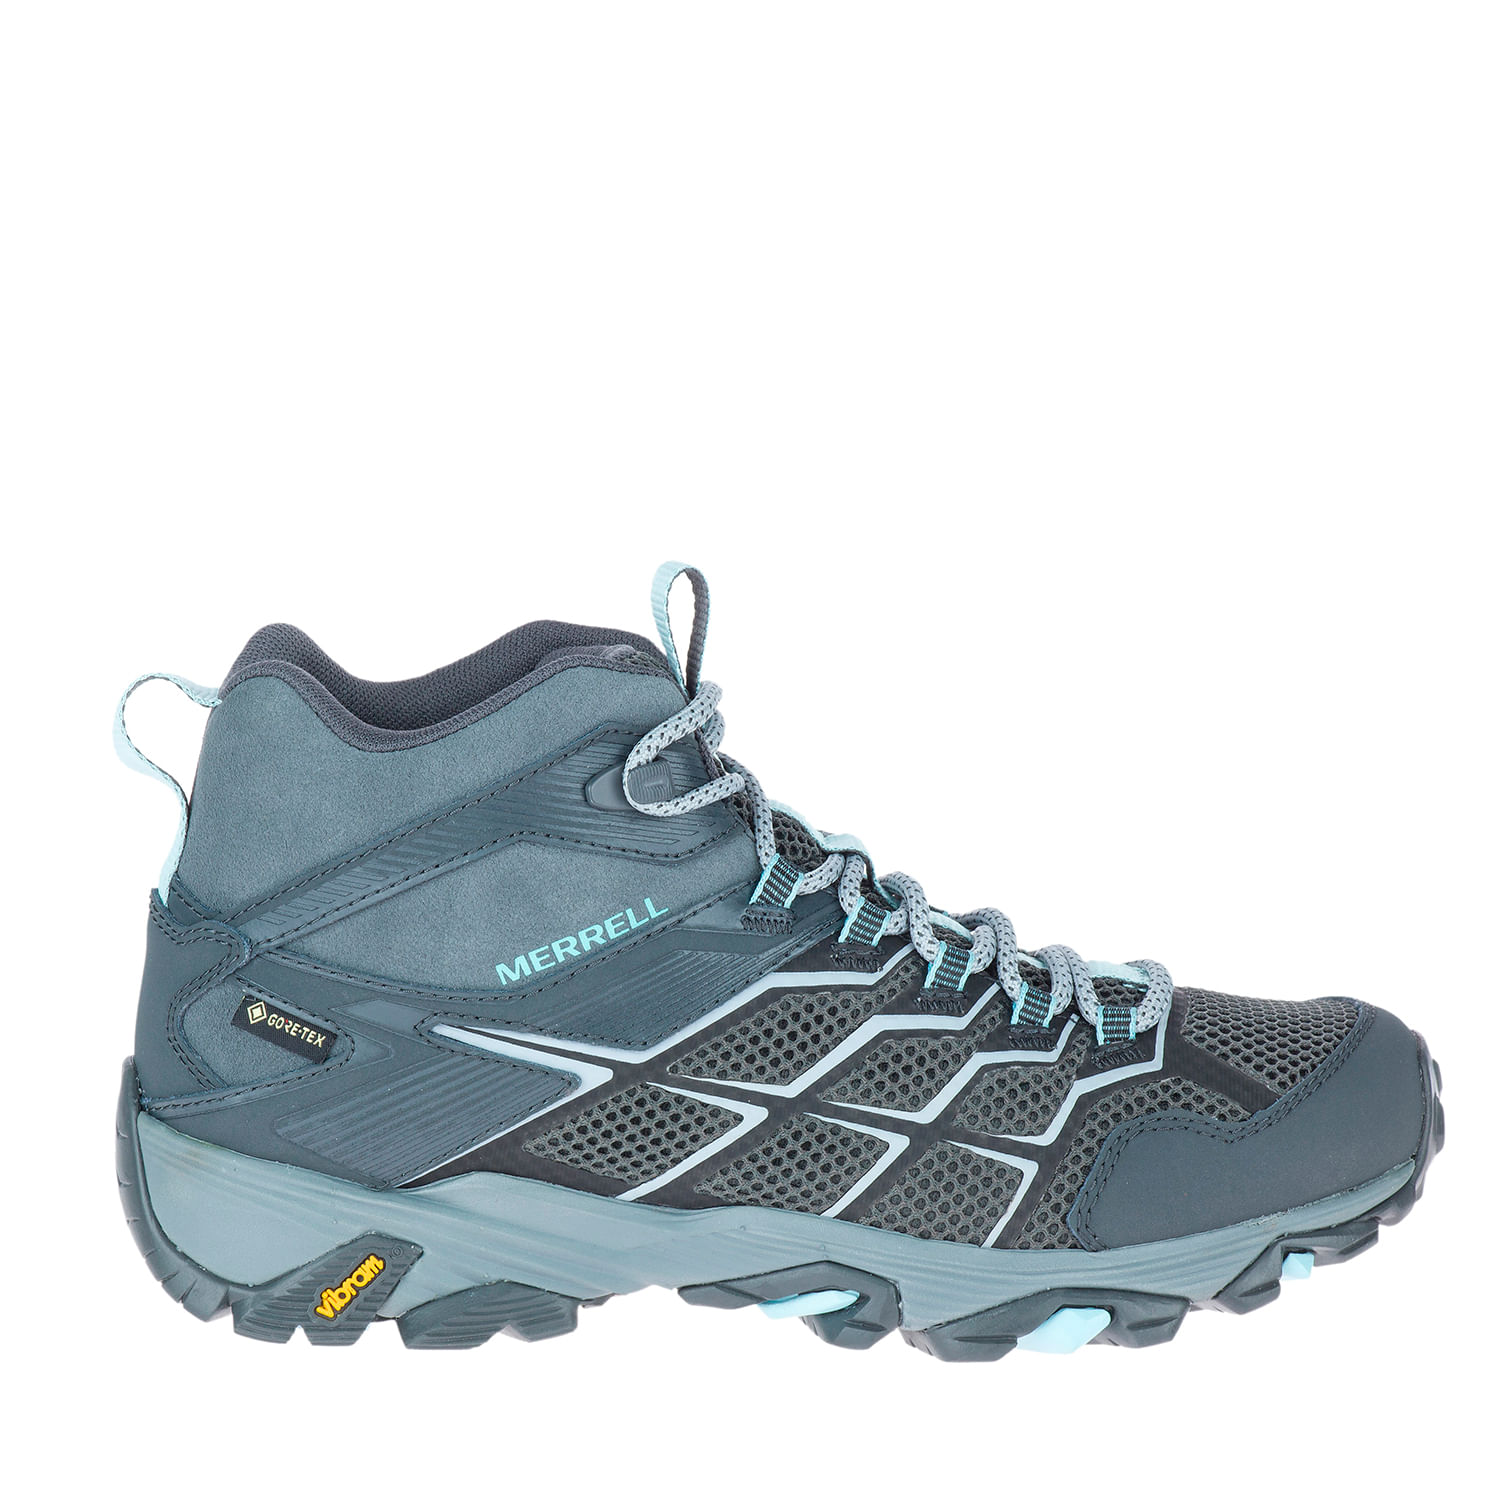 Mujer Moab Fst Mid Gore-Tex-Merrell Chile